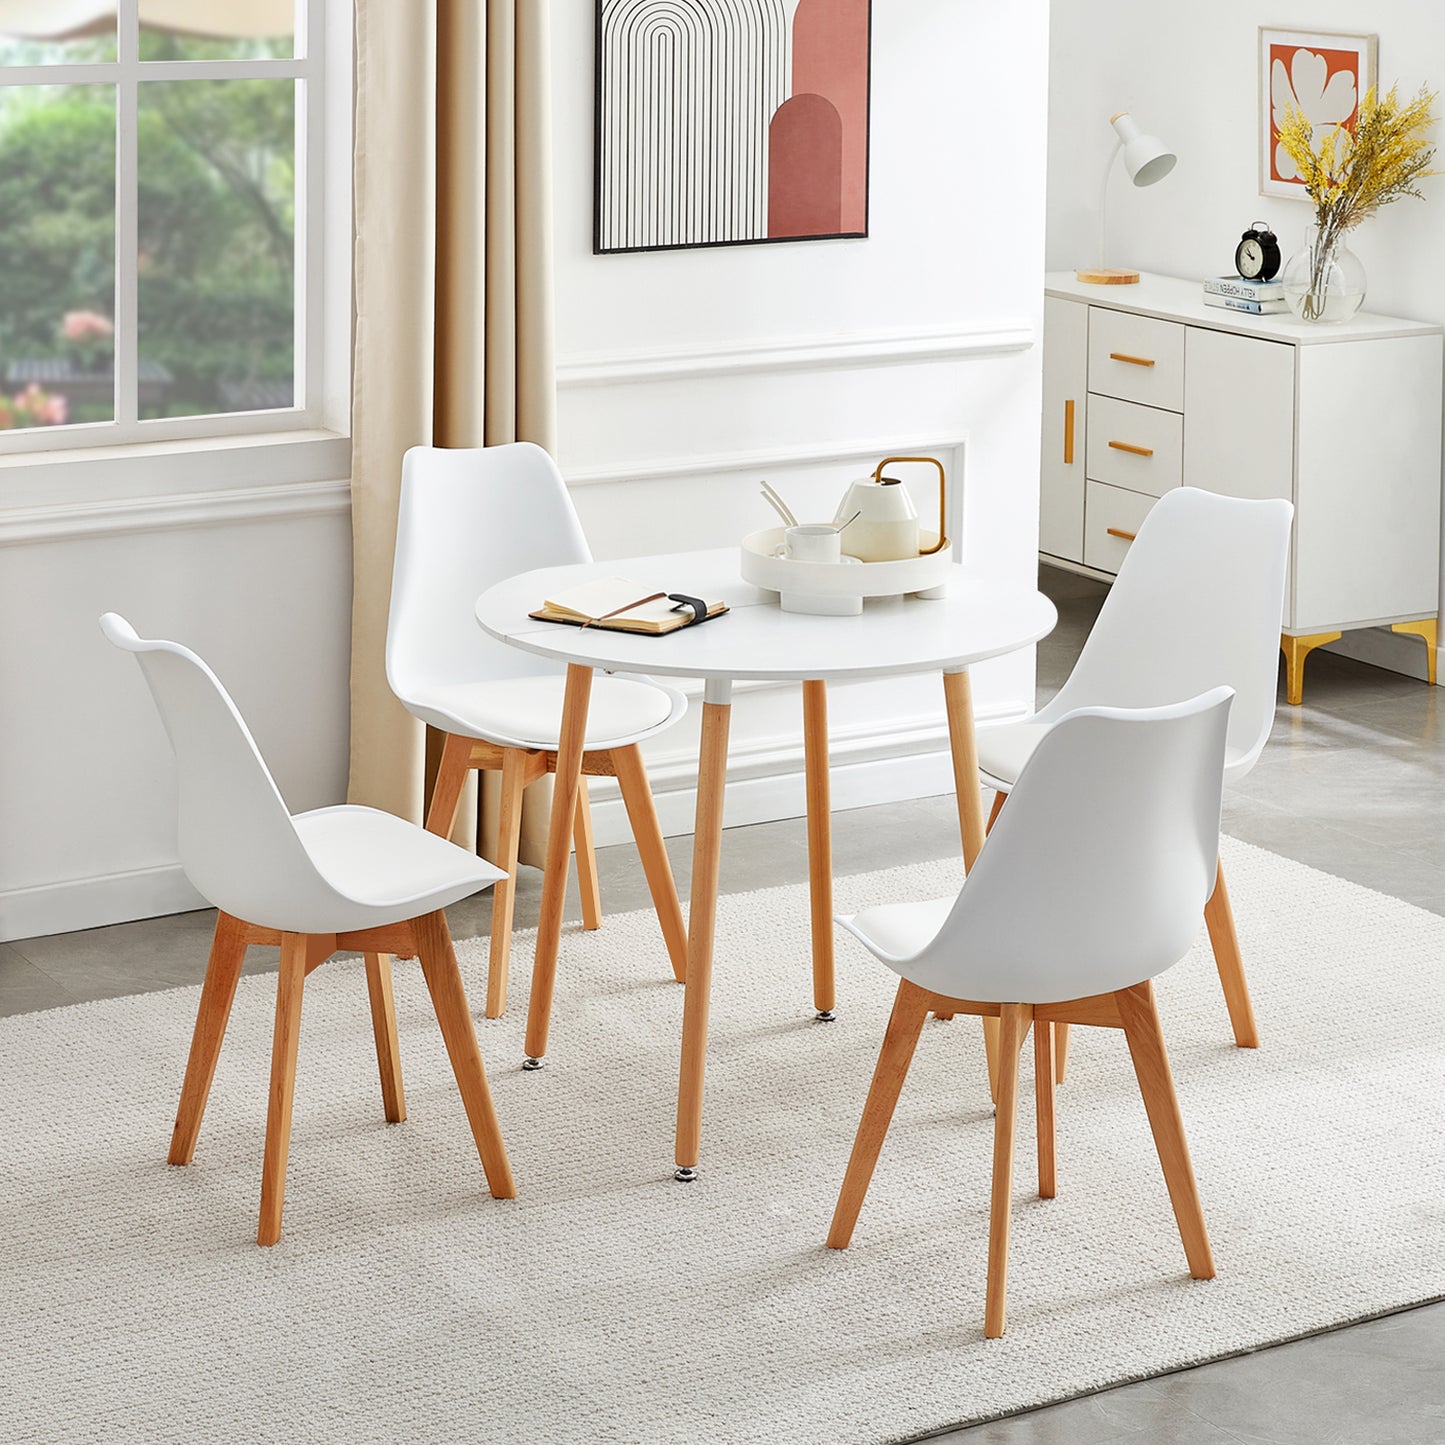 RONALD 90cm Splicing Circle Dining Table With Beech Legs-White